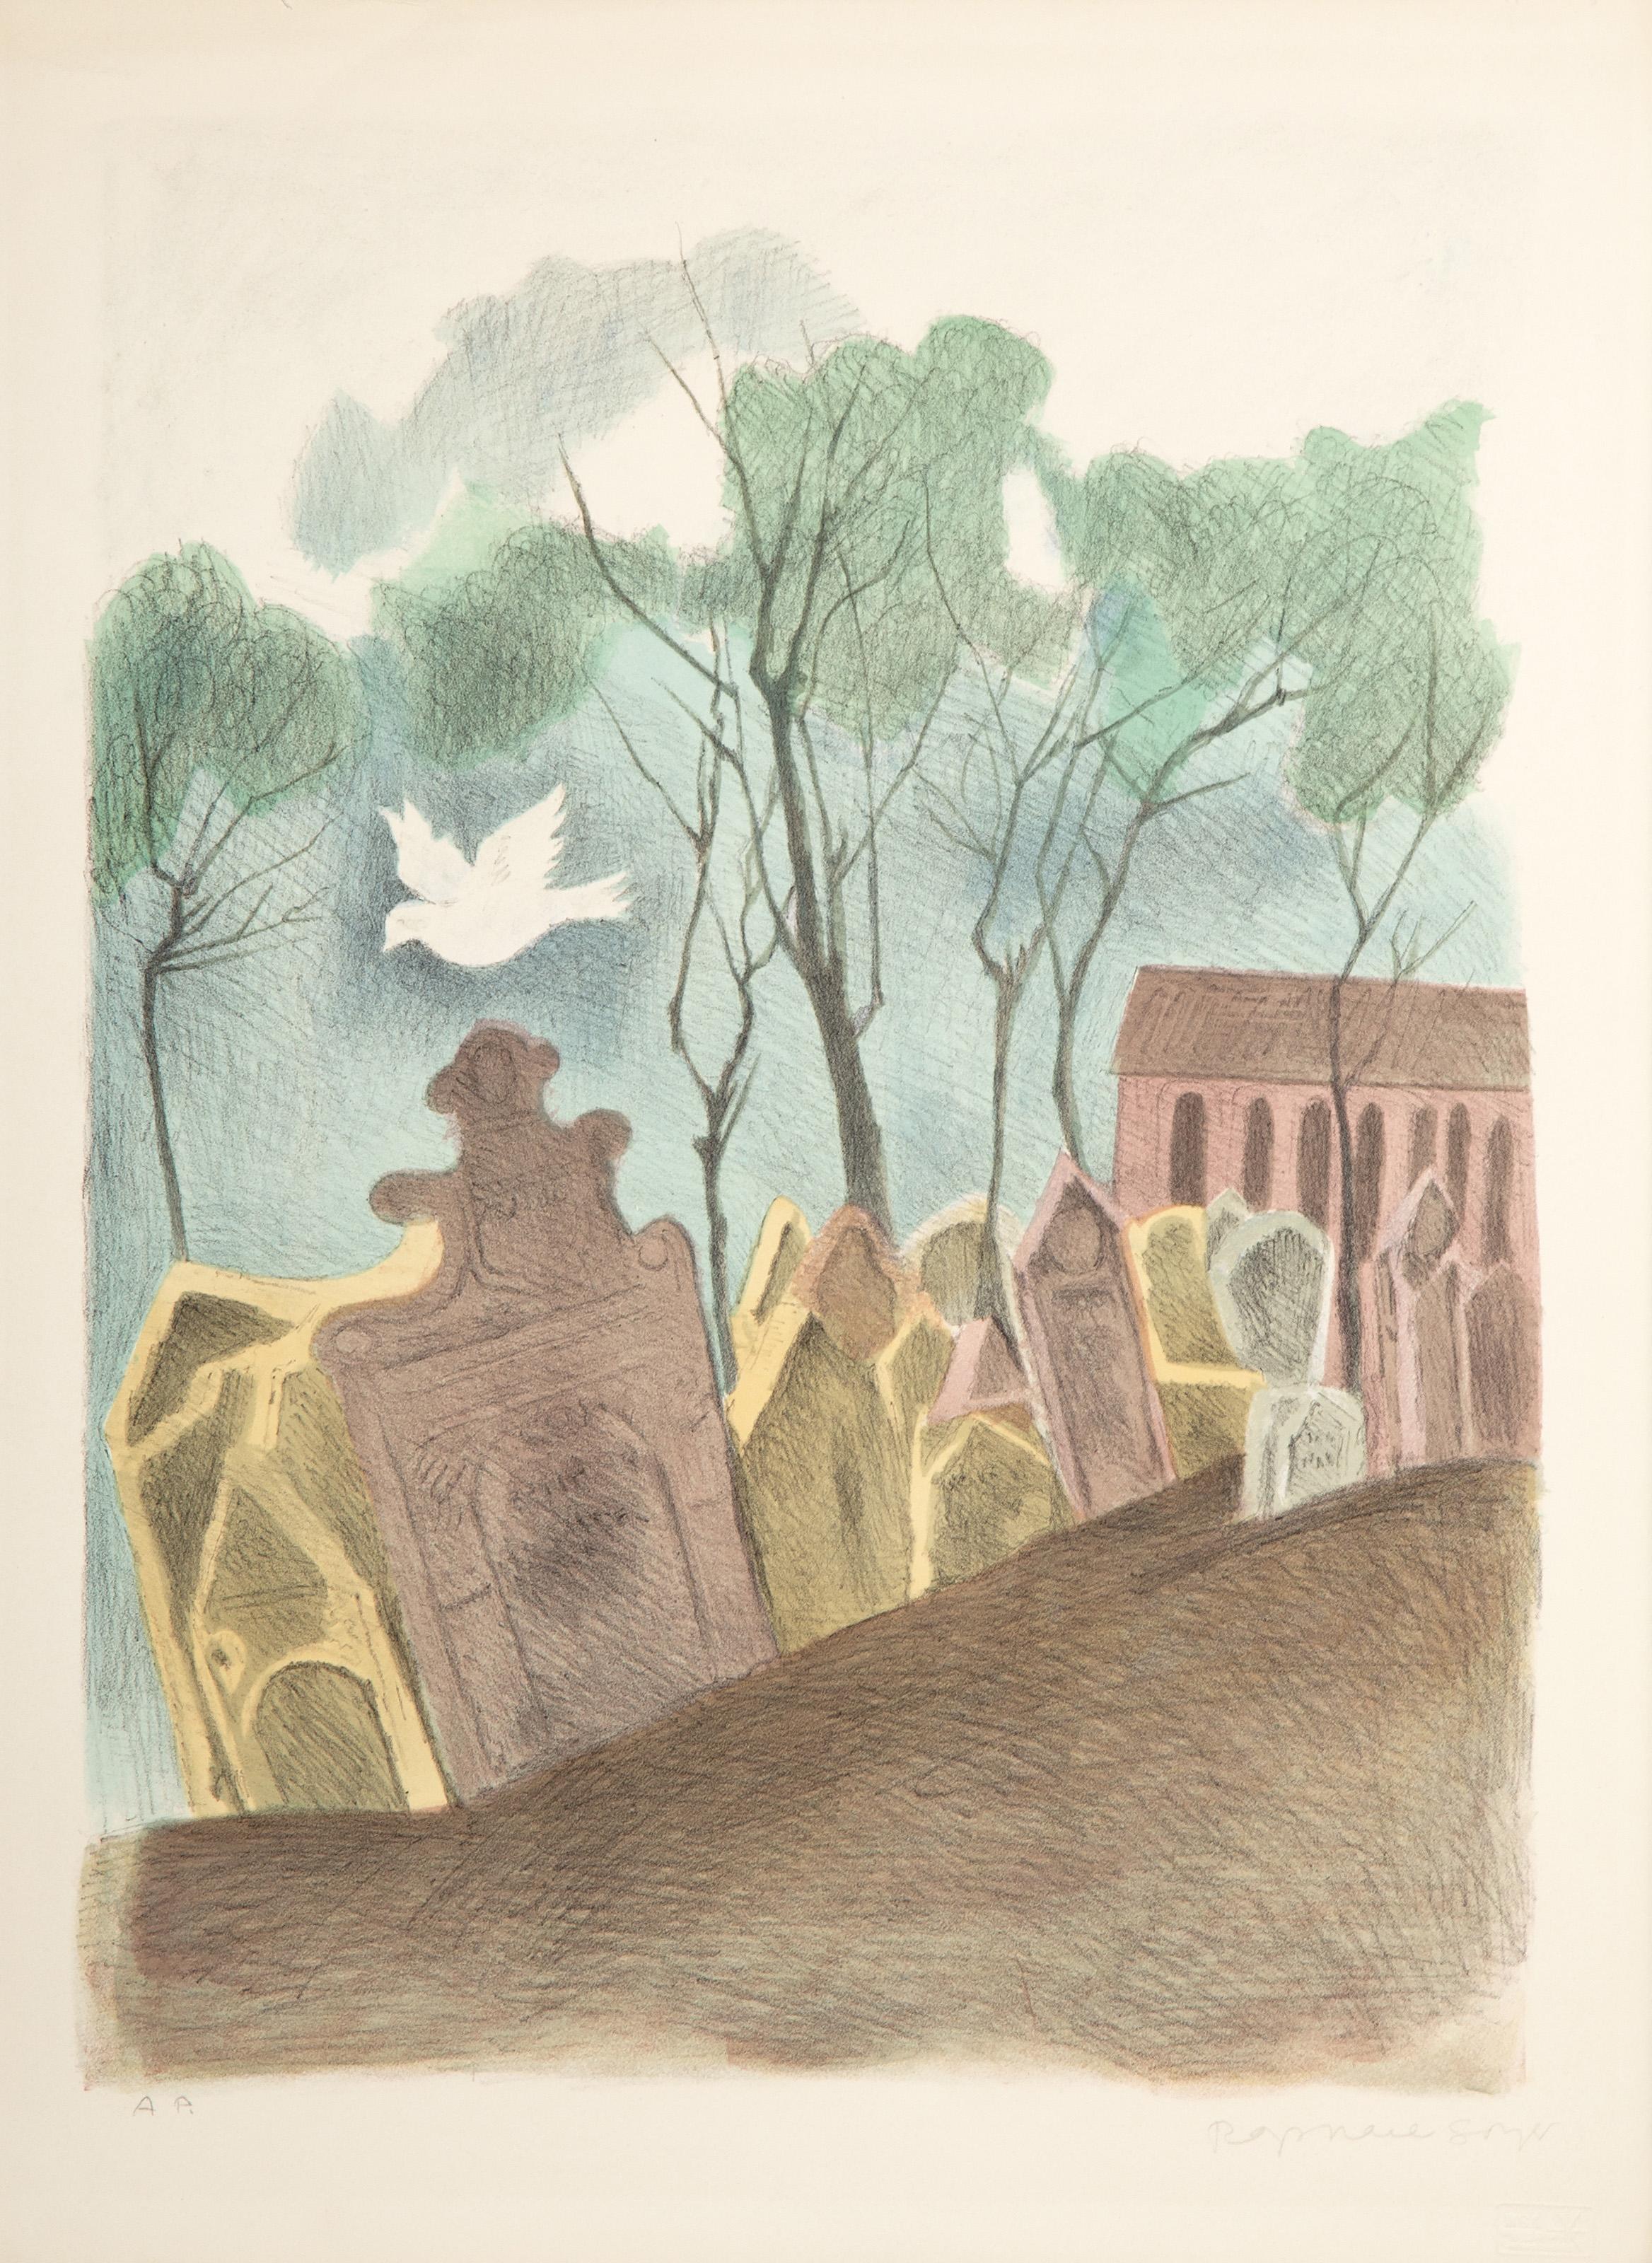 Raphael Soyer, Russian/American (1899 - 1987) -  Dove in Graveyard. Year: 1970, Medium: Lithograph, signed and numbered in pencil, Edition: AP, Image Size: 22 x 16.5 inches, Size: 26 x 19 in. (66.04 x 48.26 cm), Publisher: Touchstone Publishers, NY 